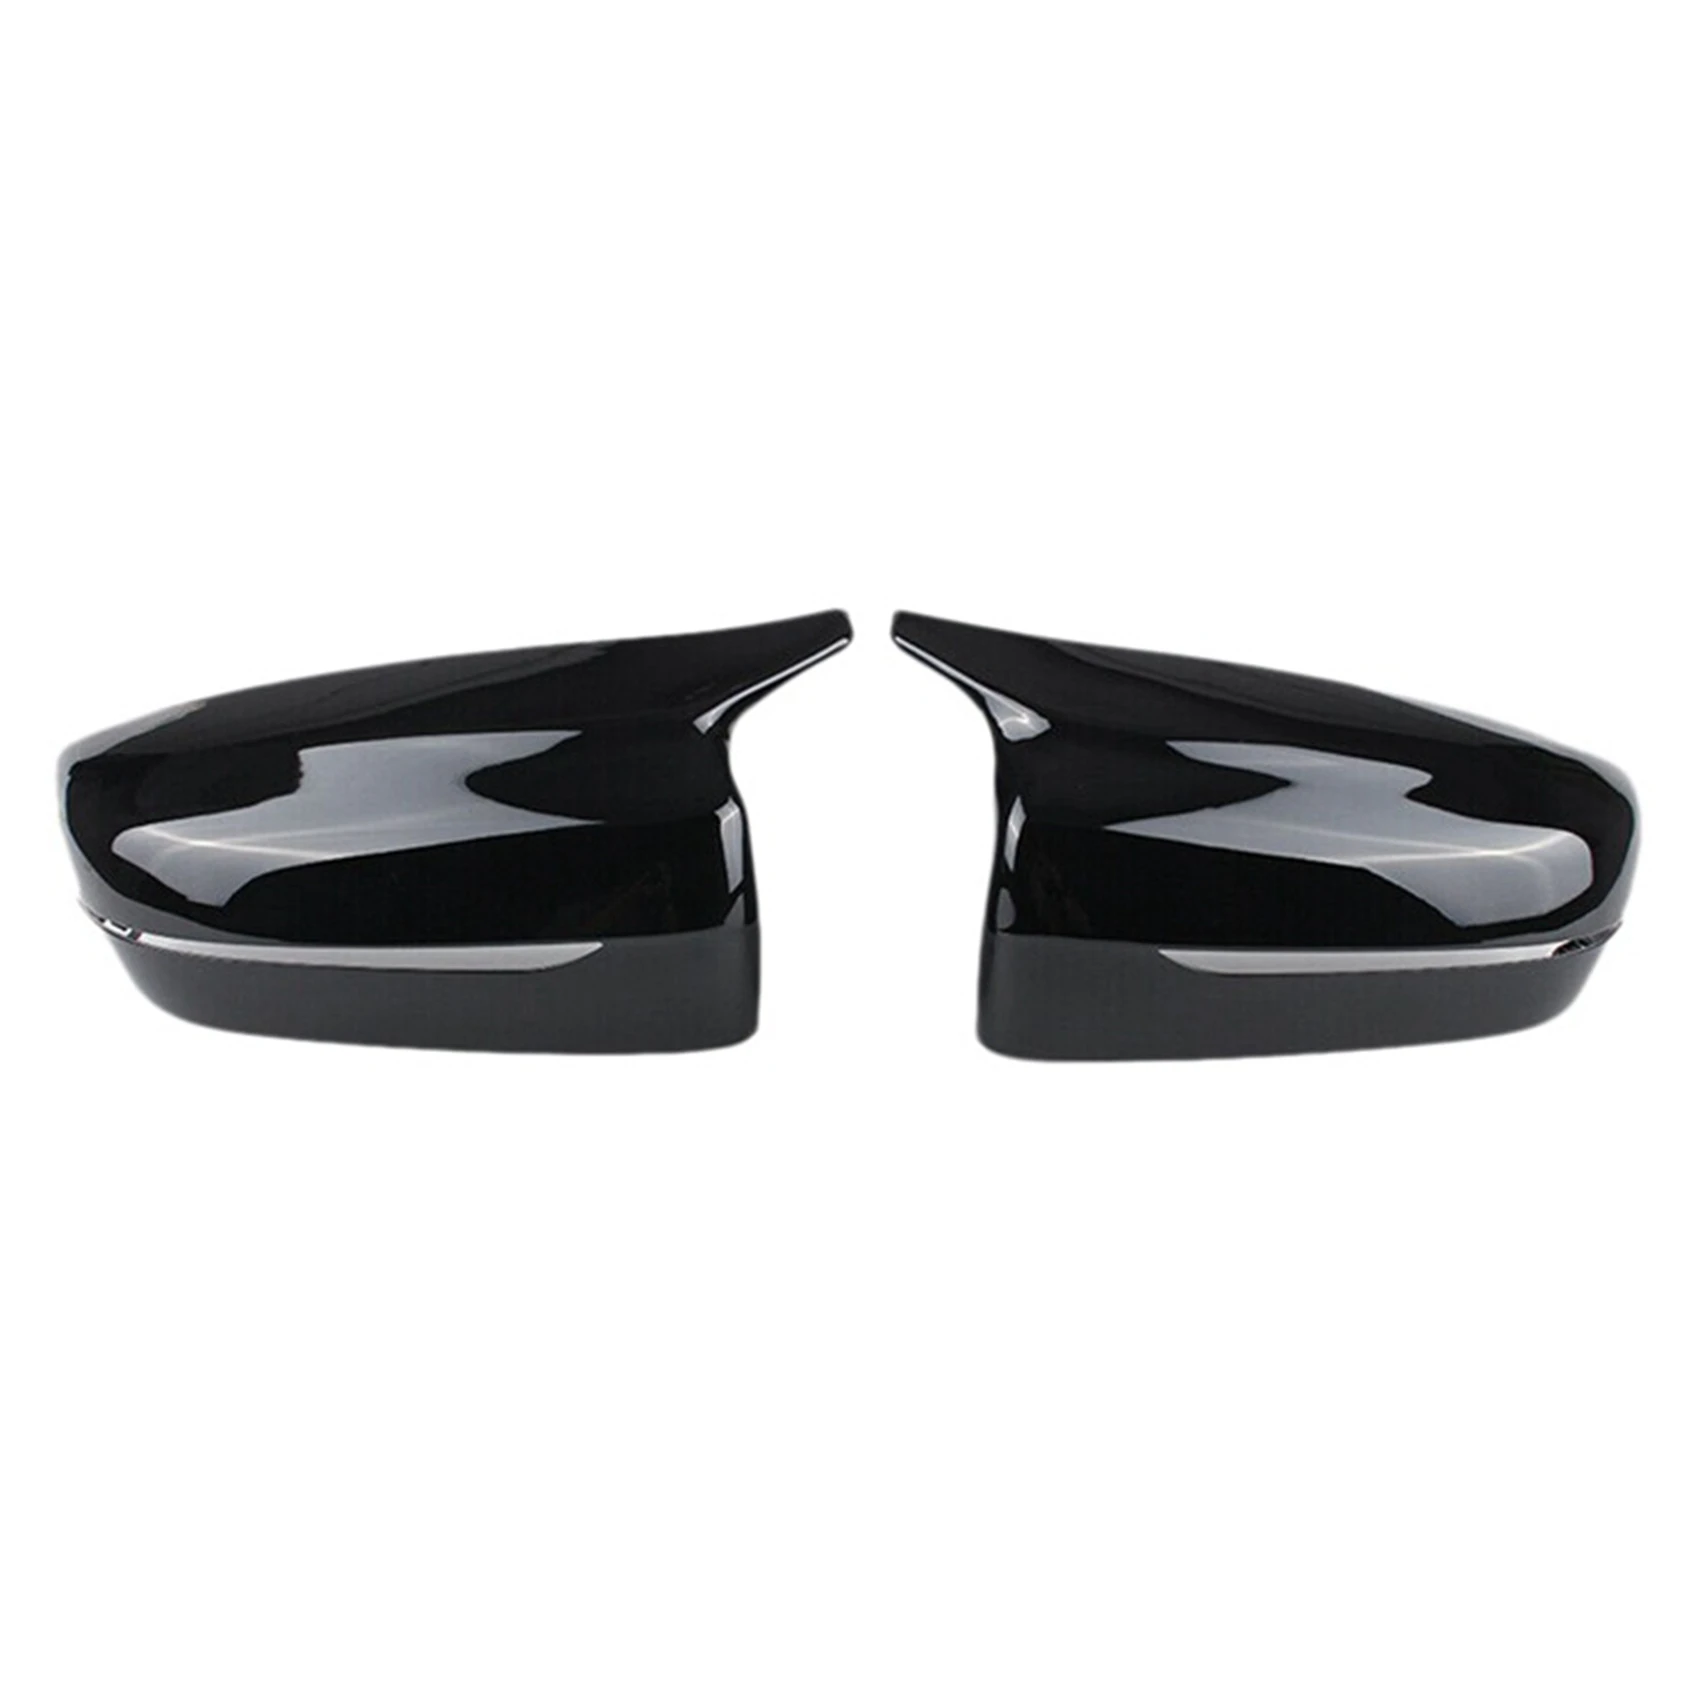 

For-BMW G20 G28 G30 G38 G11 G12 Bright Black Replacement Mirror Covers Car Side Door Rear View Mirror Cover Cap Shell